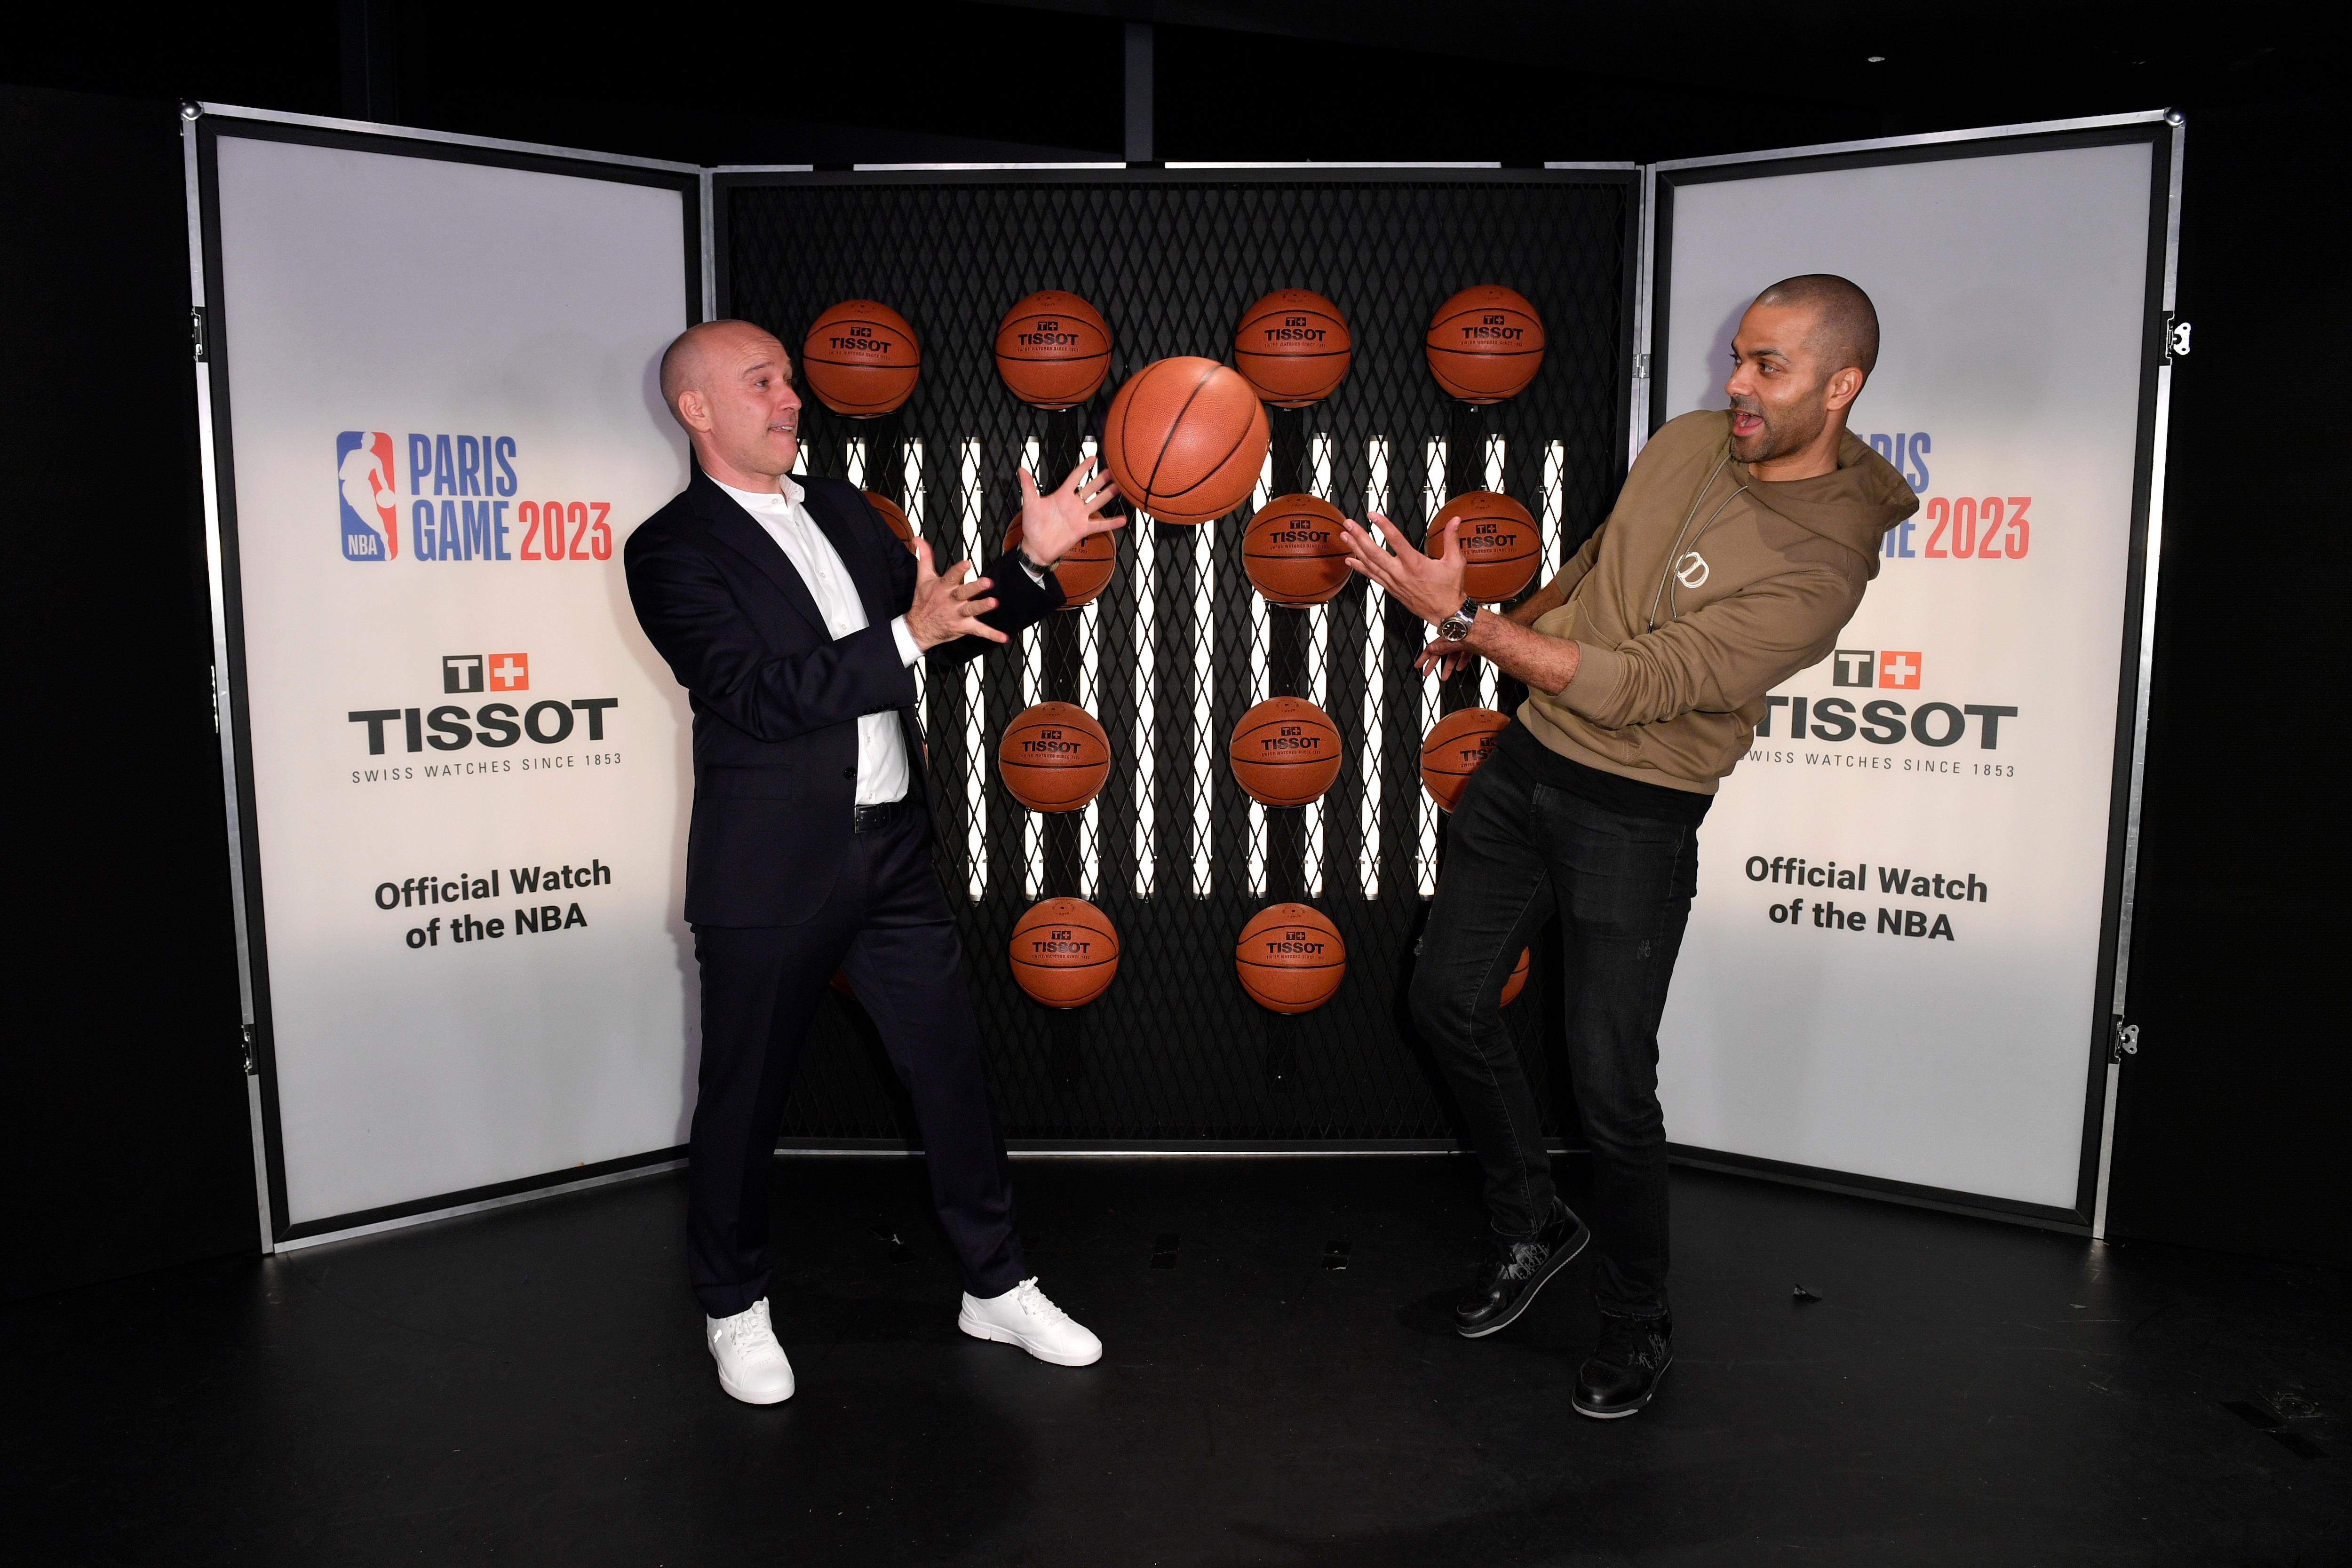 Tony Parker and Sylvain Dolla pass a basketball to each other at the Paris Game 2023